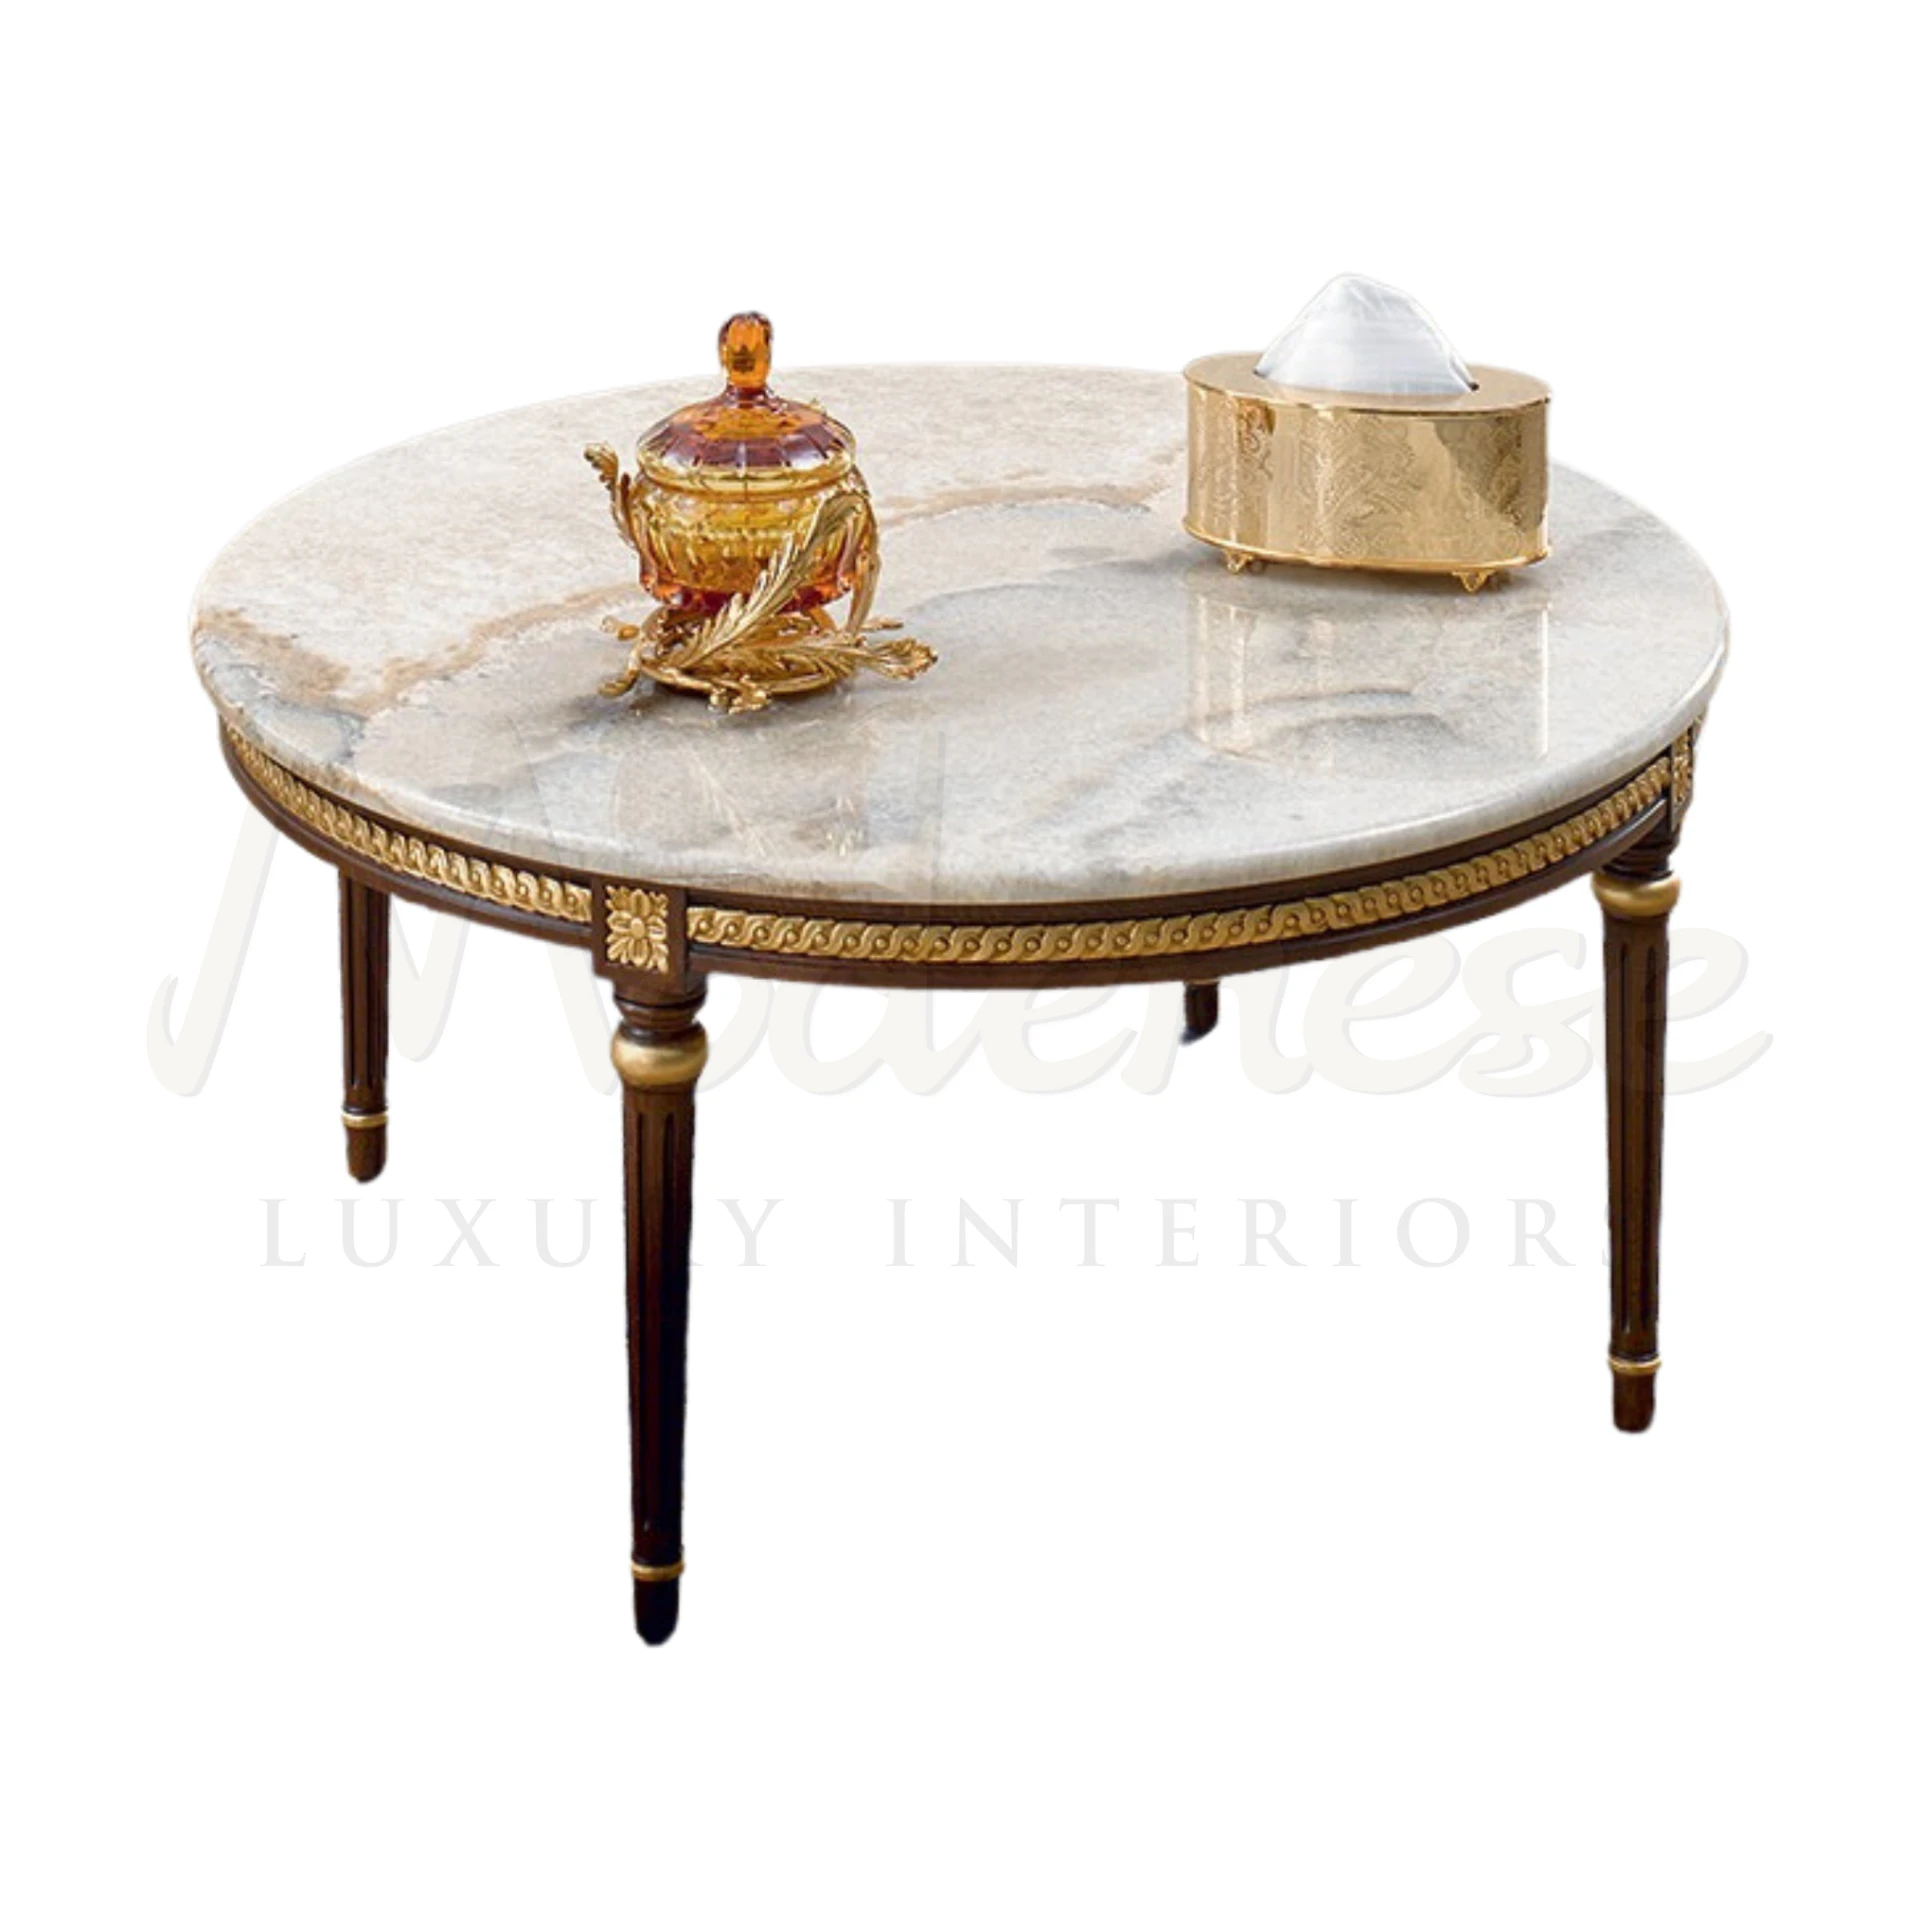 " Luxury White Marble Coffee Table, Italian design for classic elegance, from Modenese Interiors.